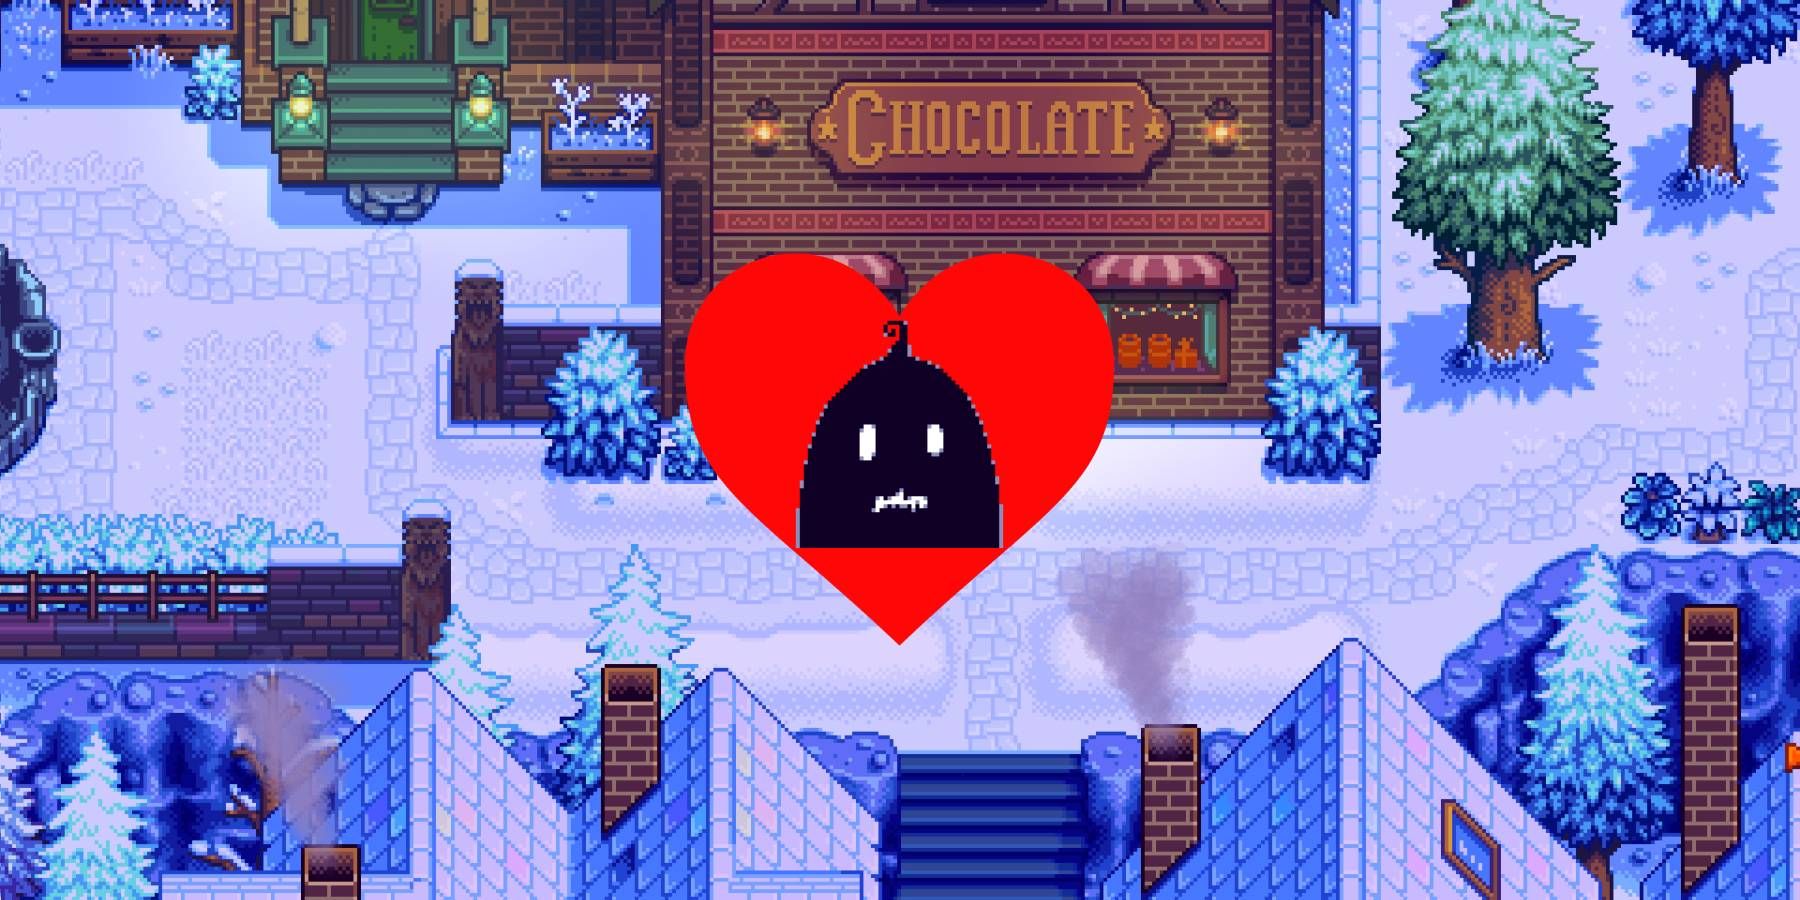 Krobus from Stardew Valley in a heart on Haunted Chocolatier preview footage